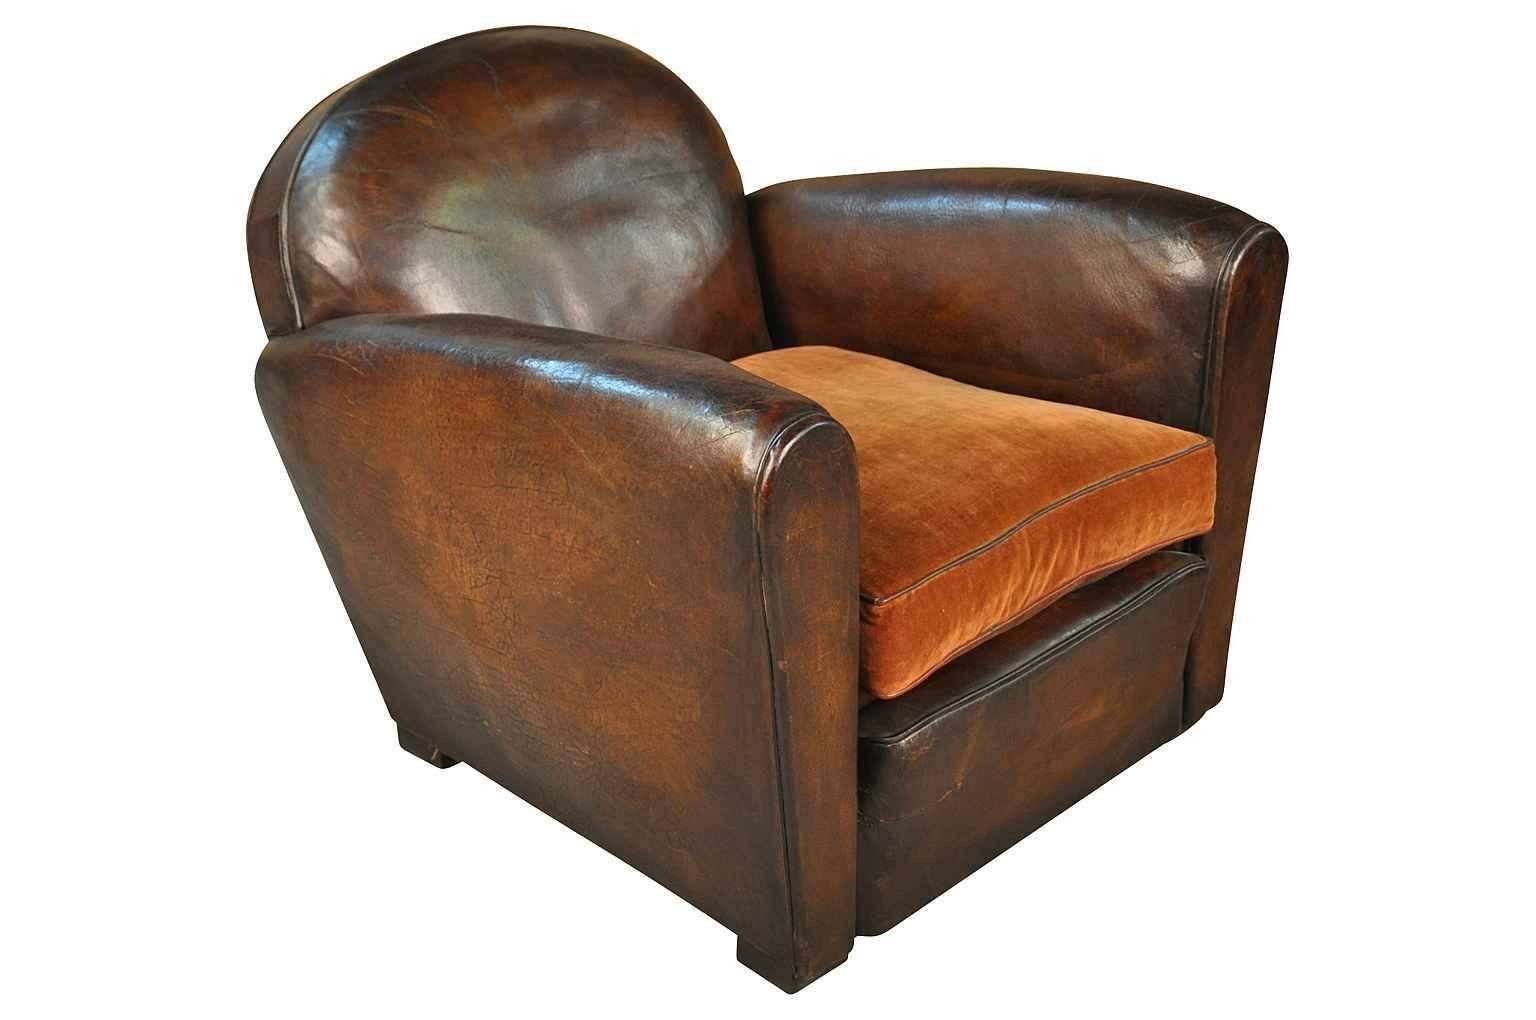 Sensational Pair of French Art Deco Leather Club Chairs 1